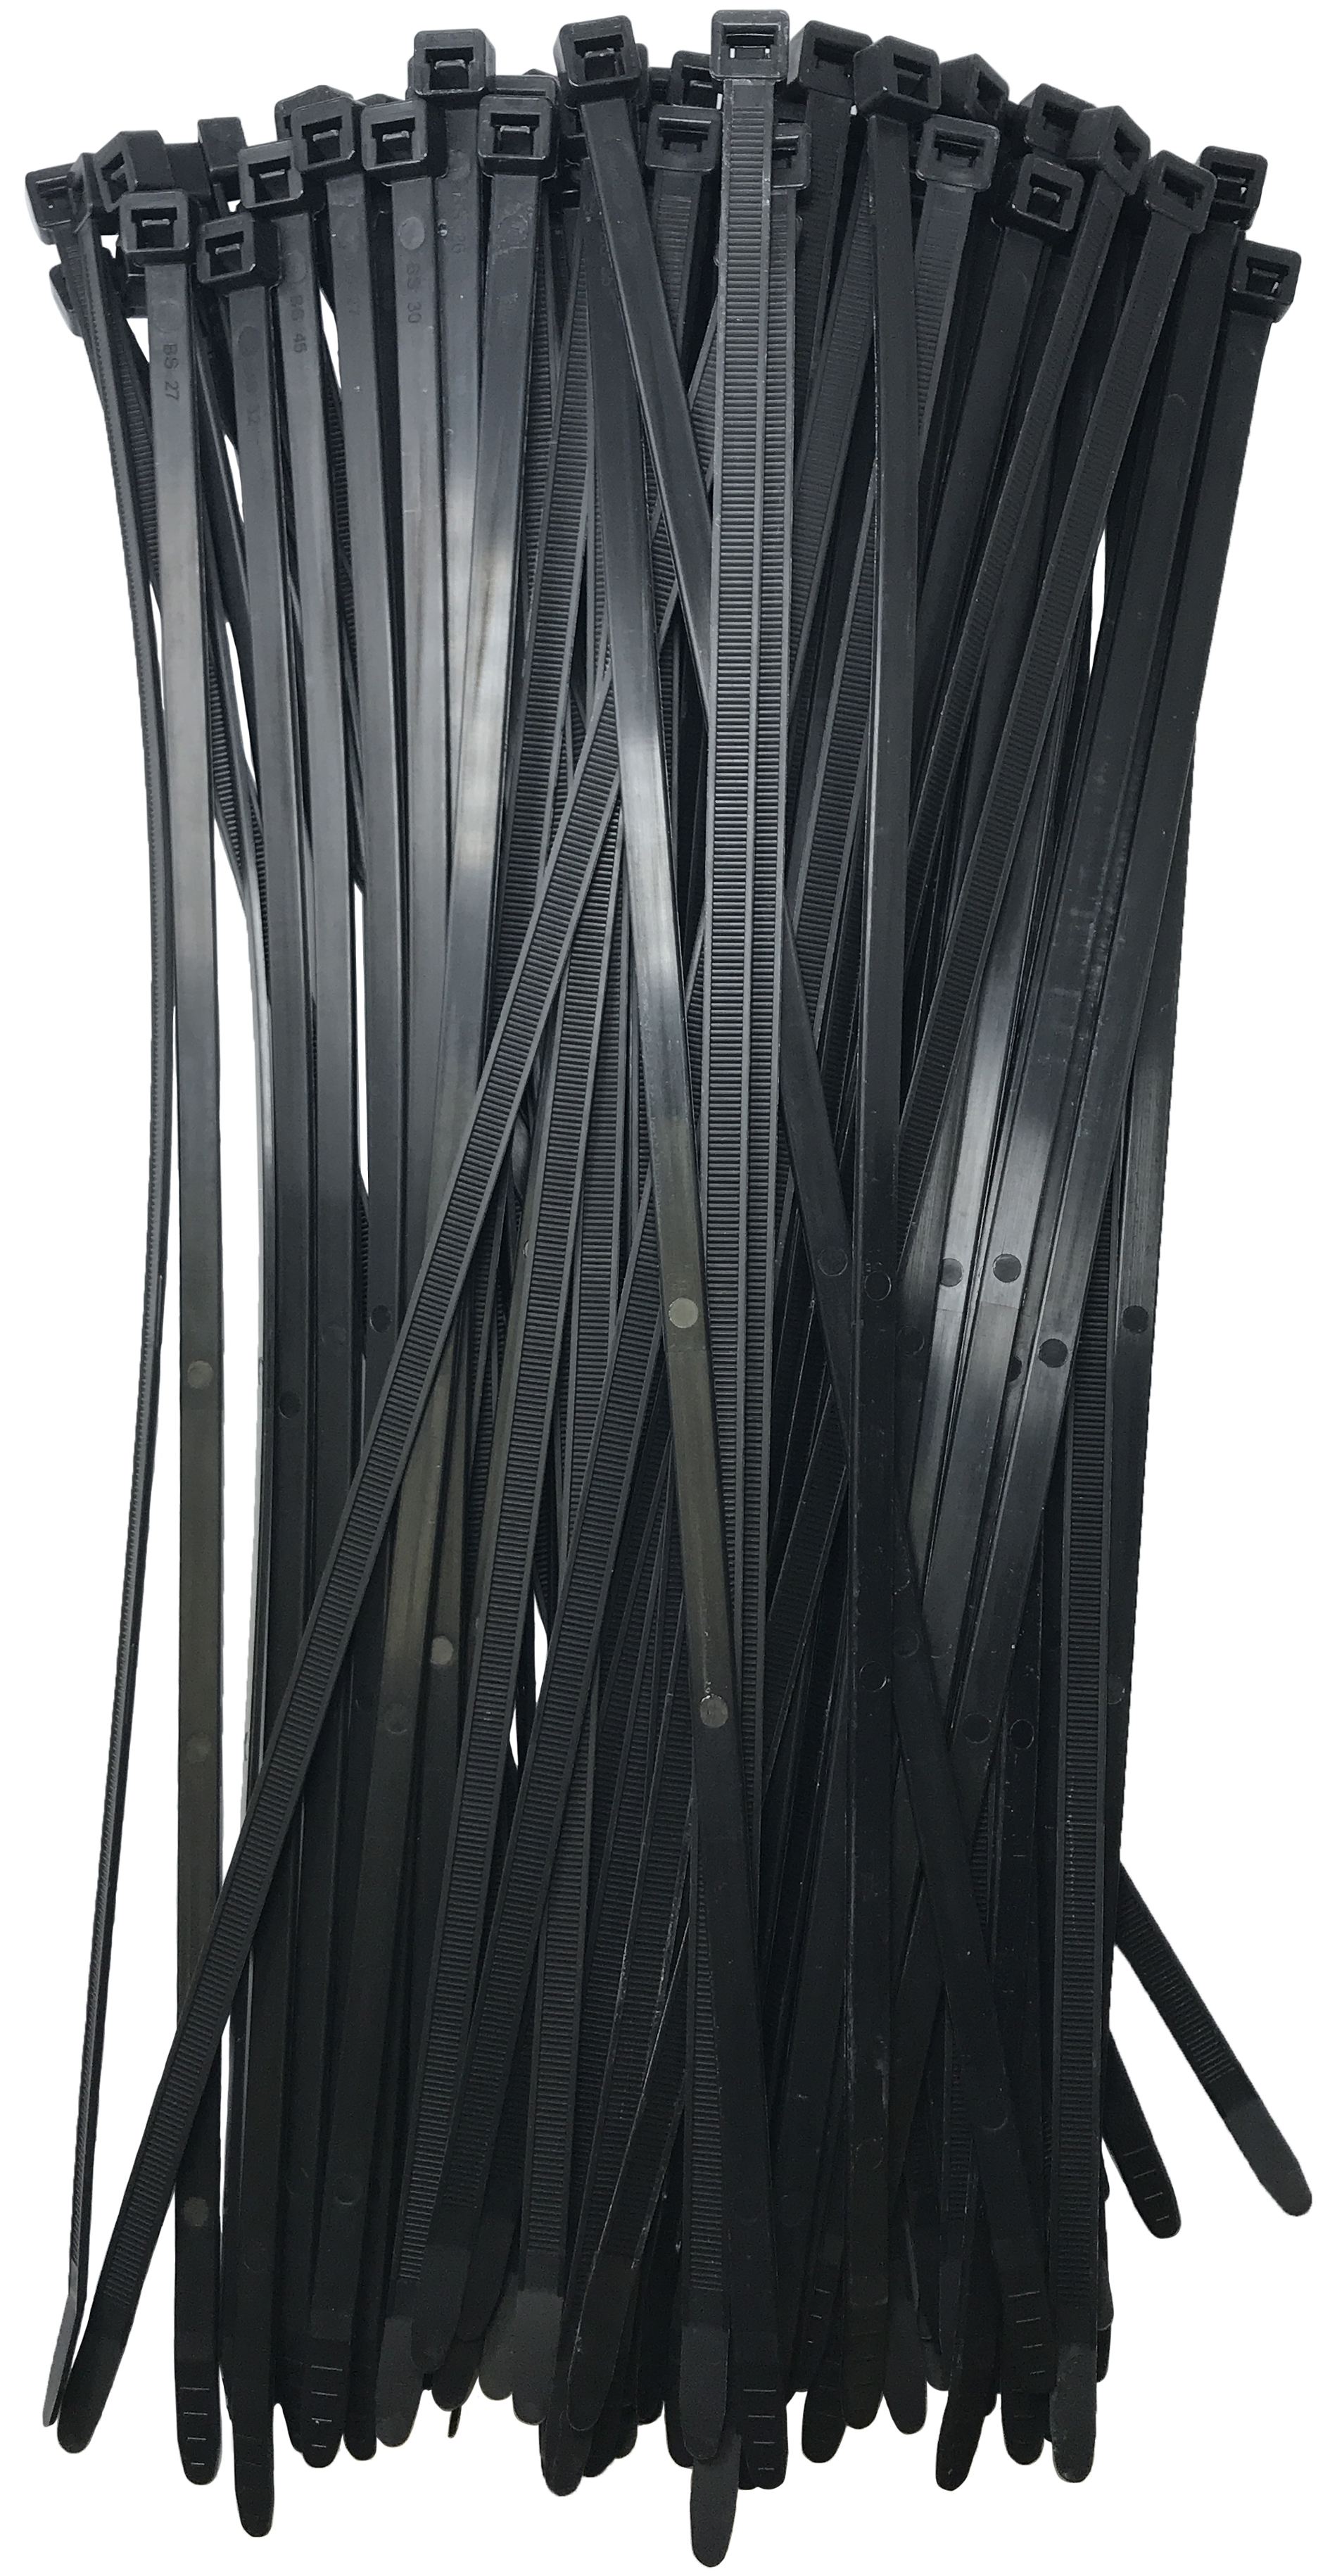 Black 12" Inch Nylon Heavy Duty Cable Wire Wrap Zip Ties 120 LBS USA MADE 100 